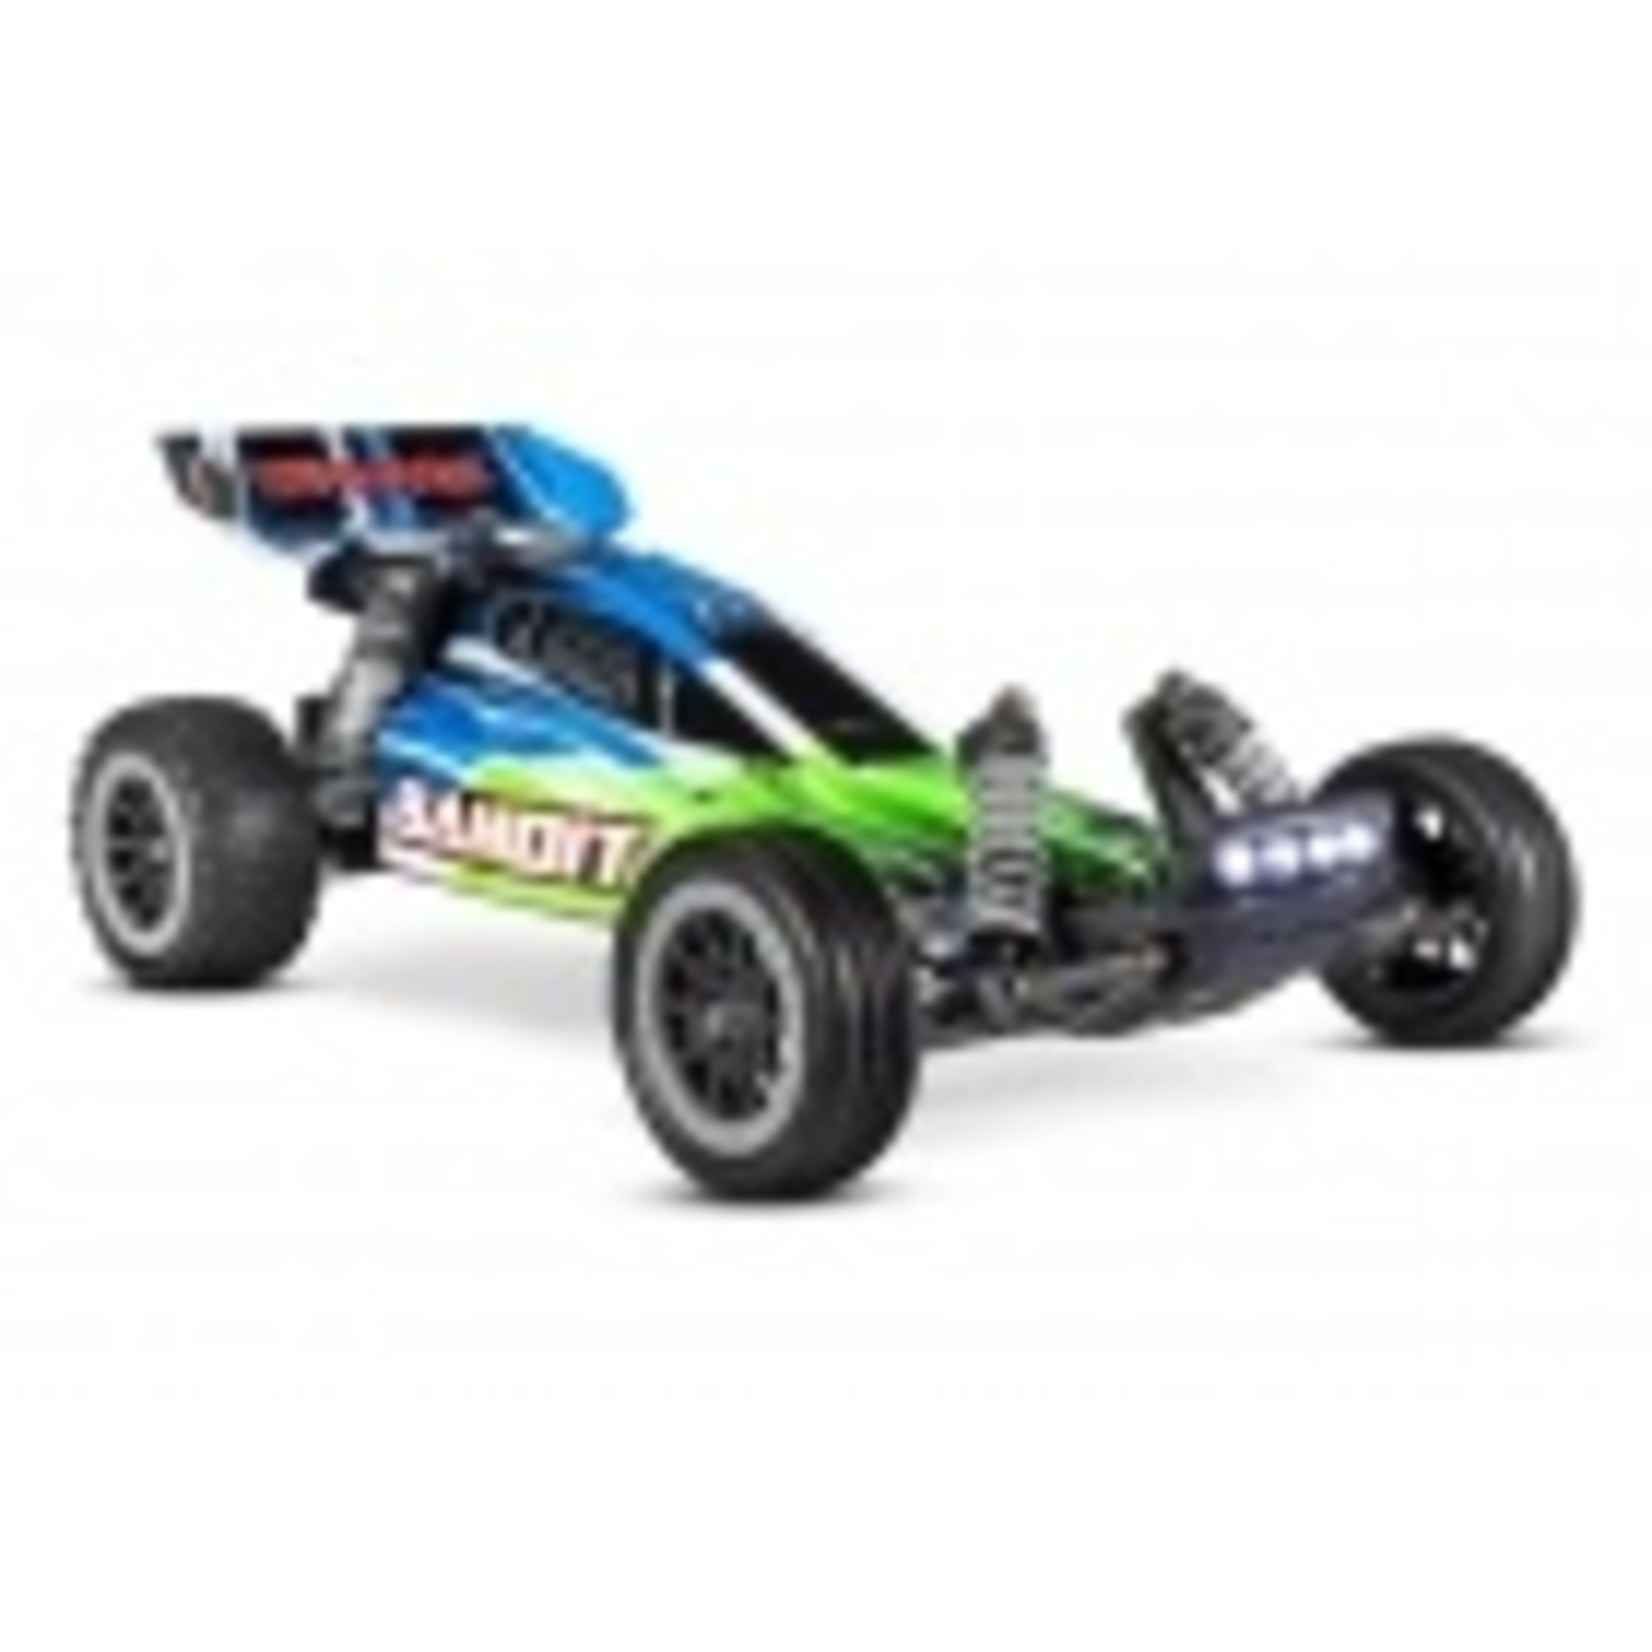 Traxxas 24054-61-GRN Bandit®: 1/10 Scale Off-Road Buggy with TQ™ 2.4GHz radio system and LED lights